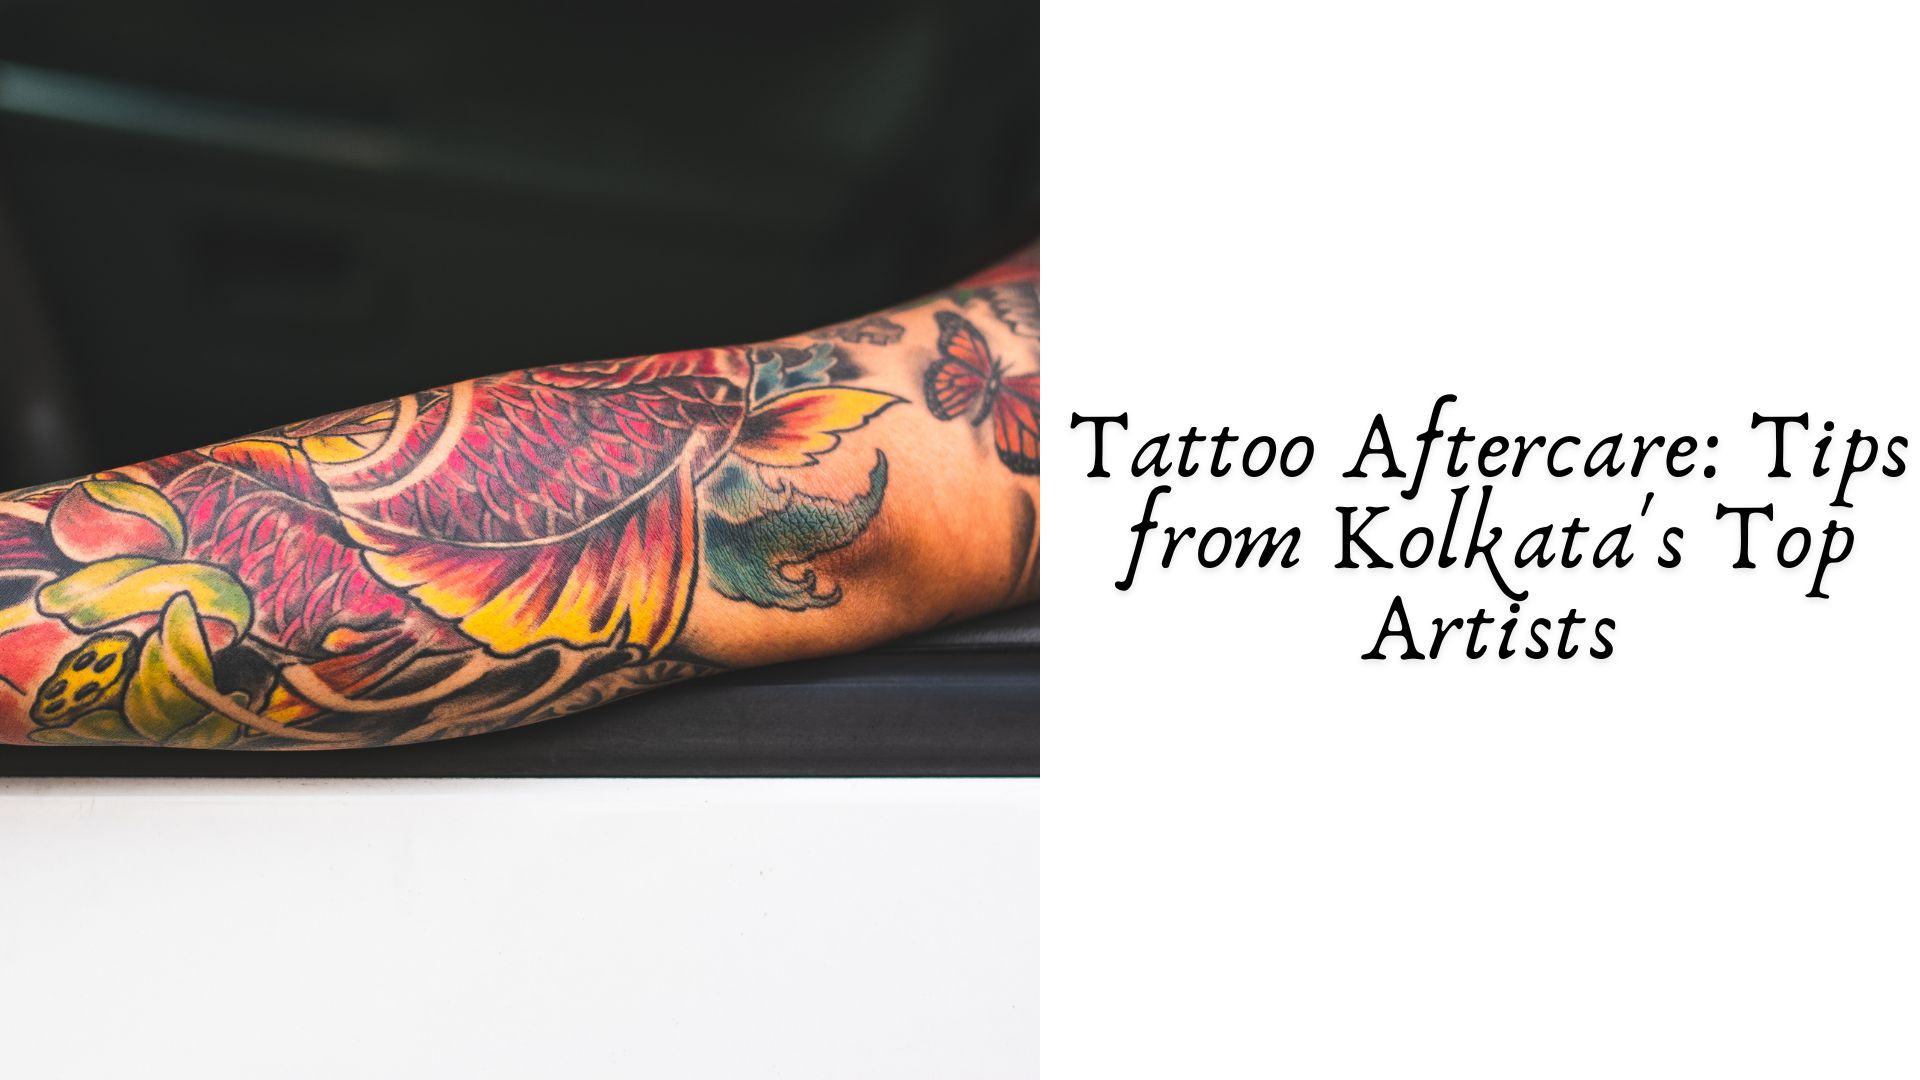 Tattoo Aftercare: Tips from Kolkata's Top Artists